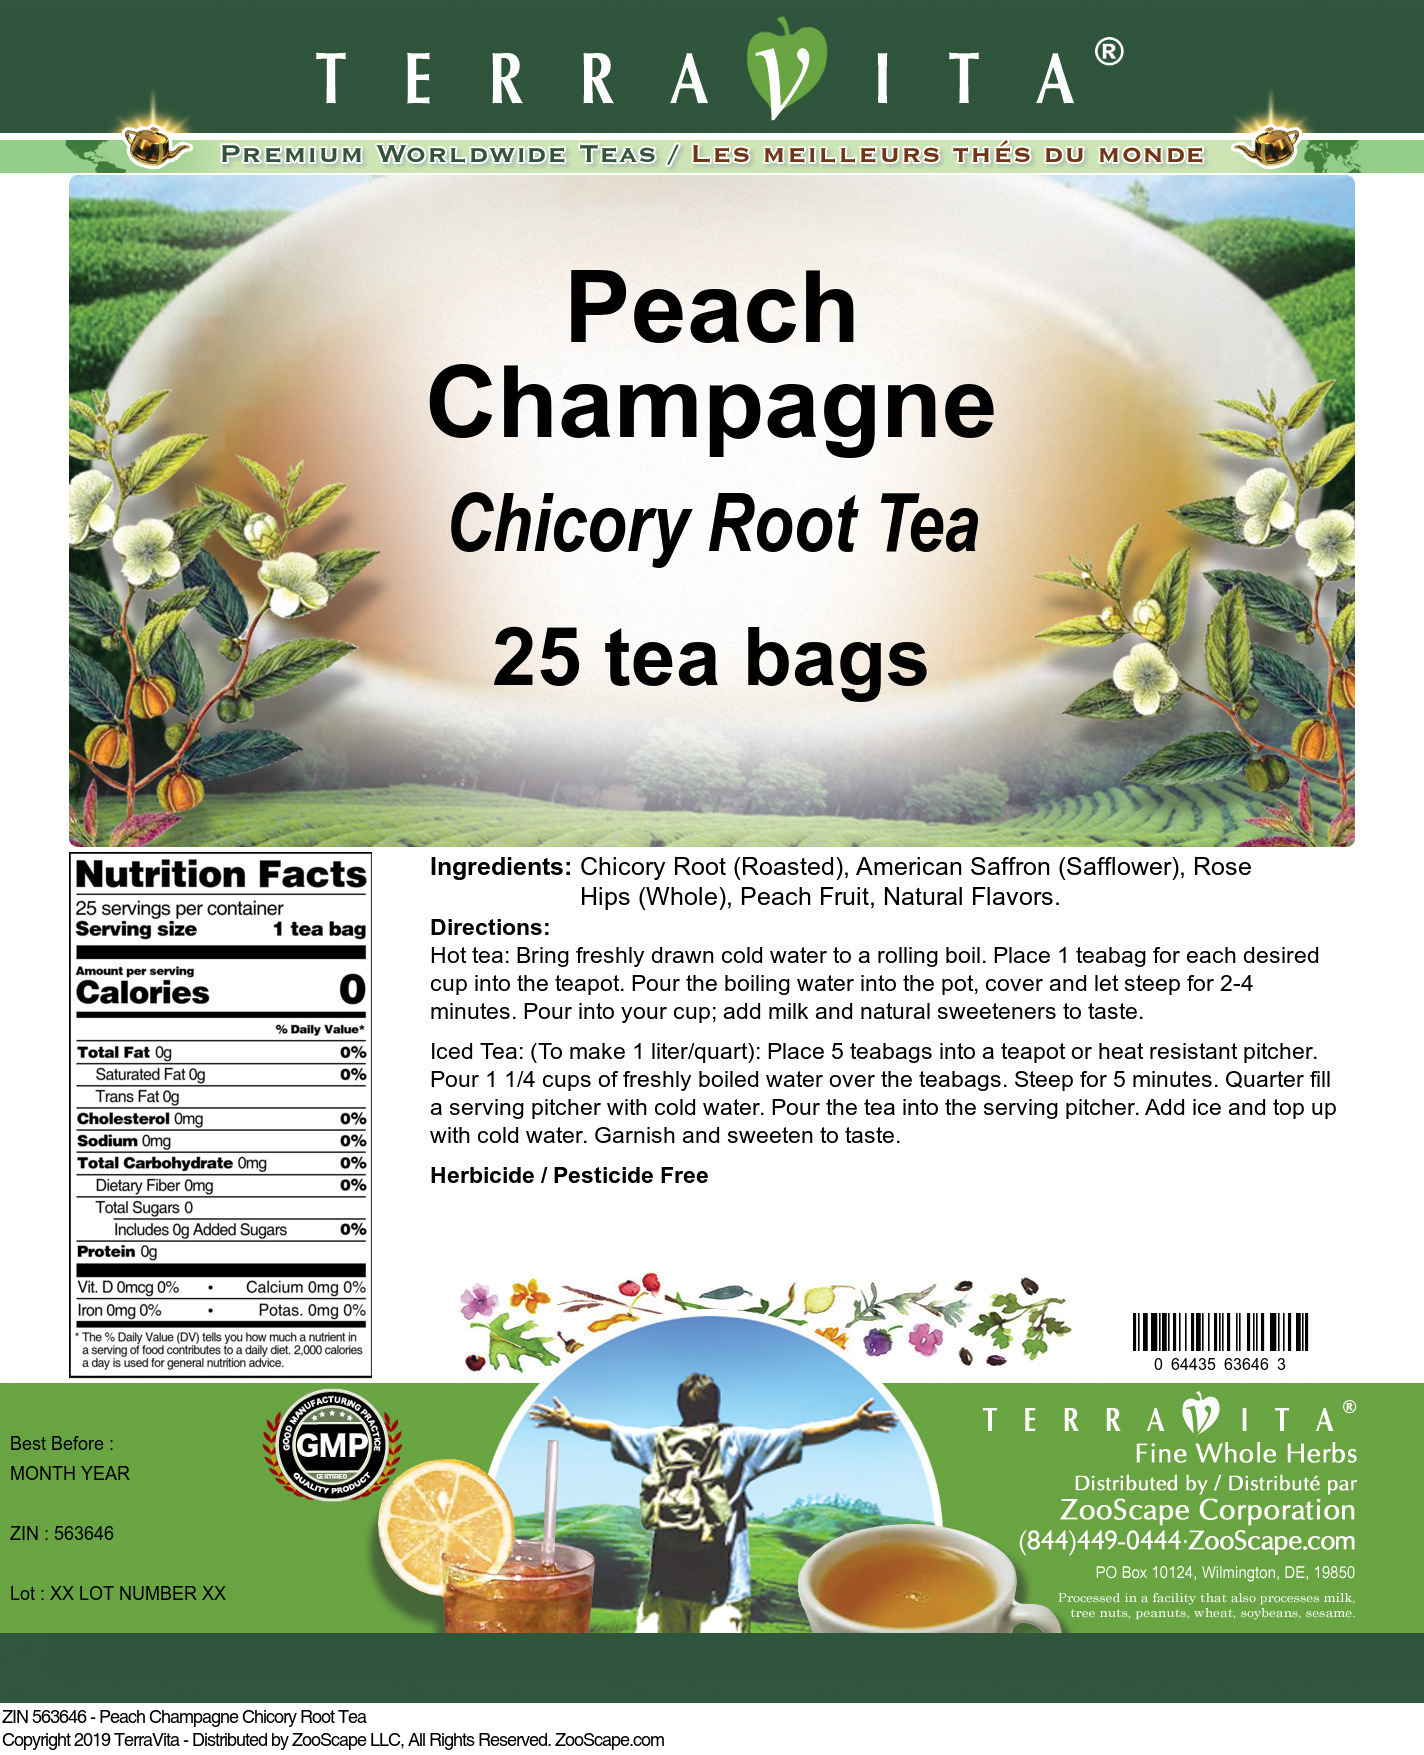 Peach Champagne Chicory Root Tea - Label